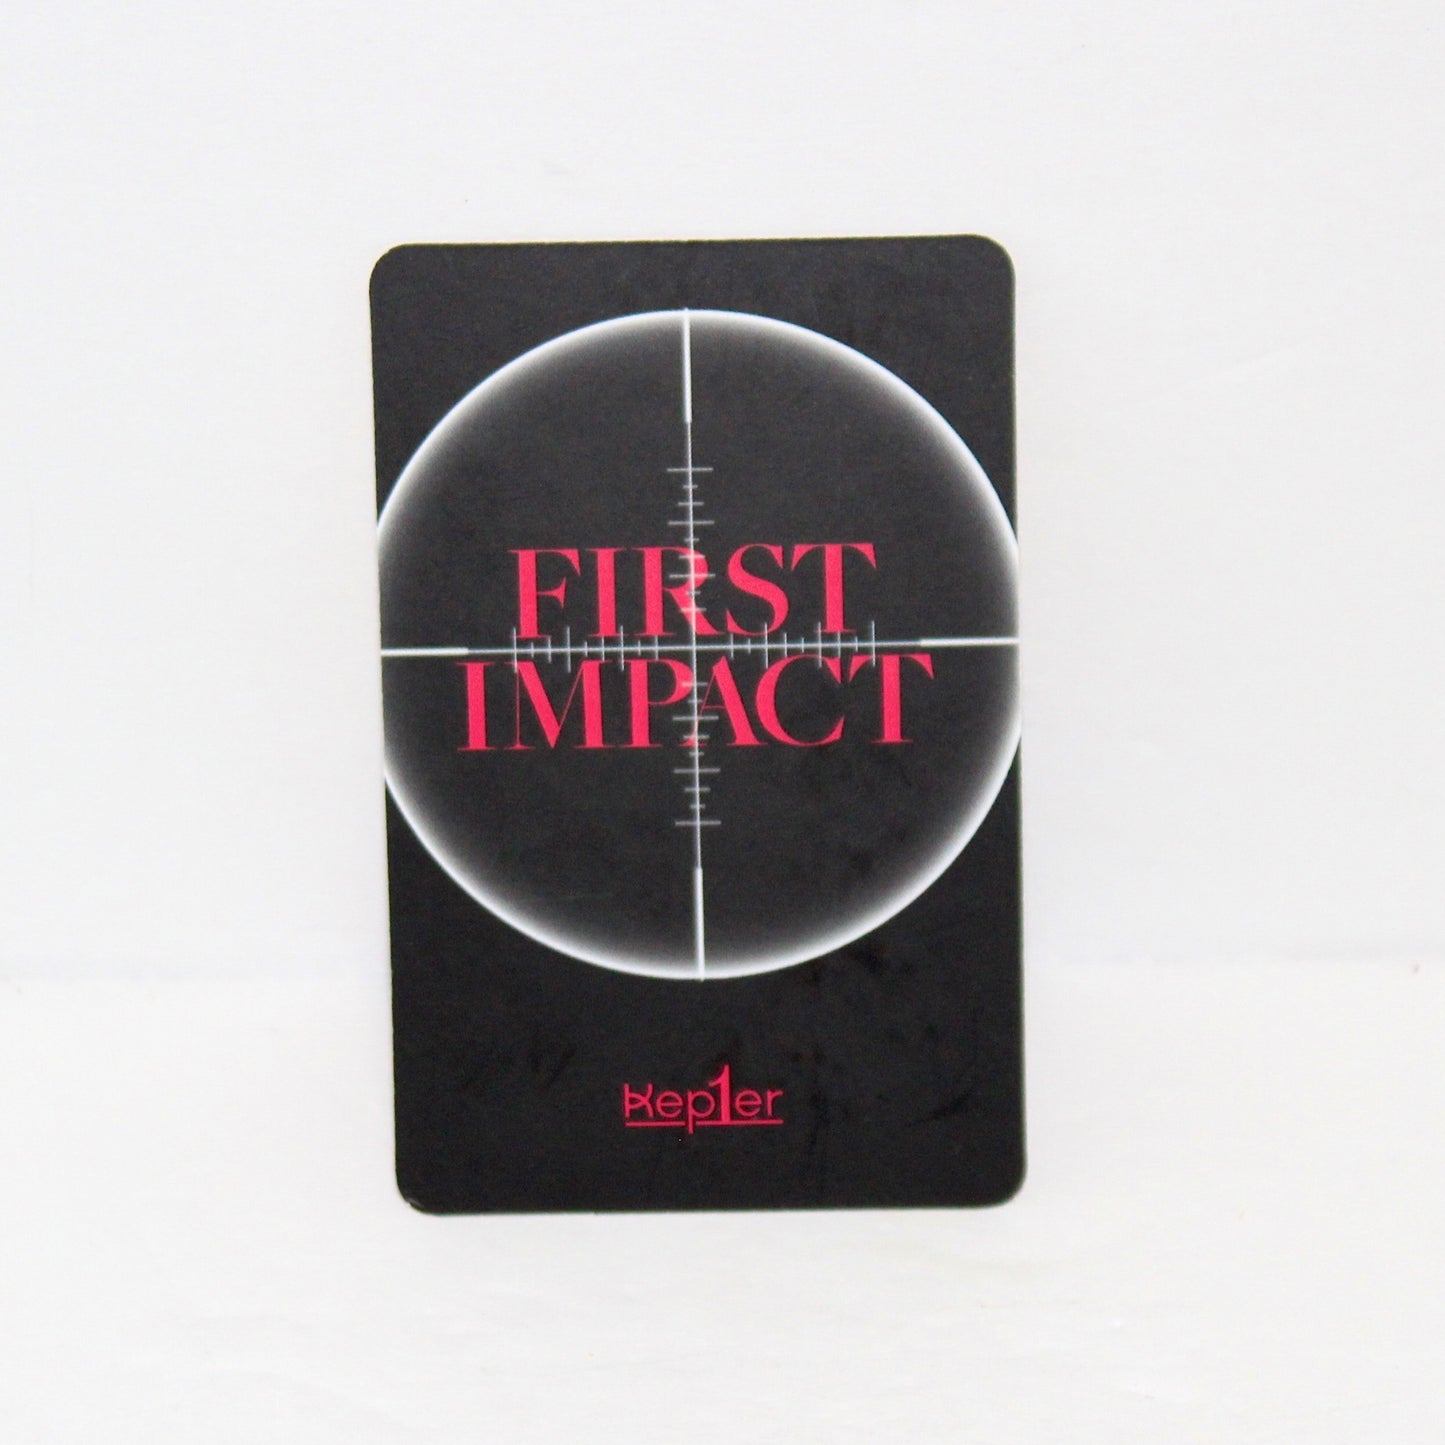 KEP1ER 1st Mini Album: First Impact | Inclusions